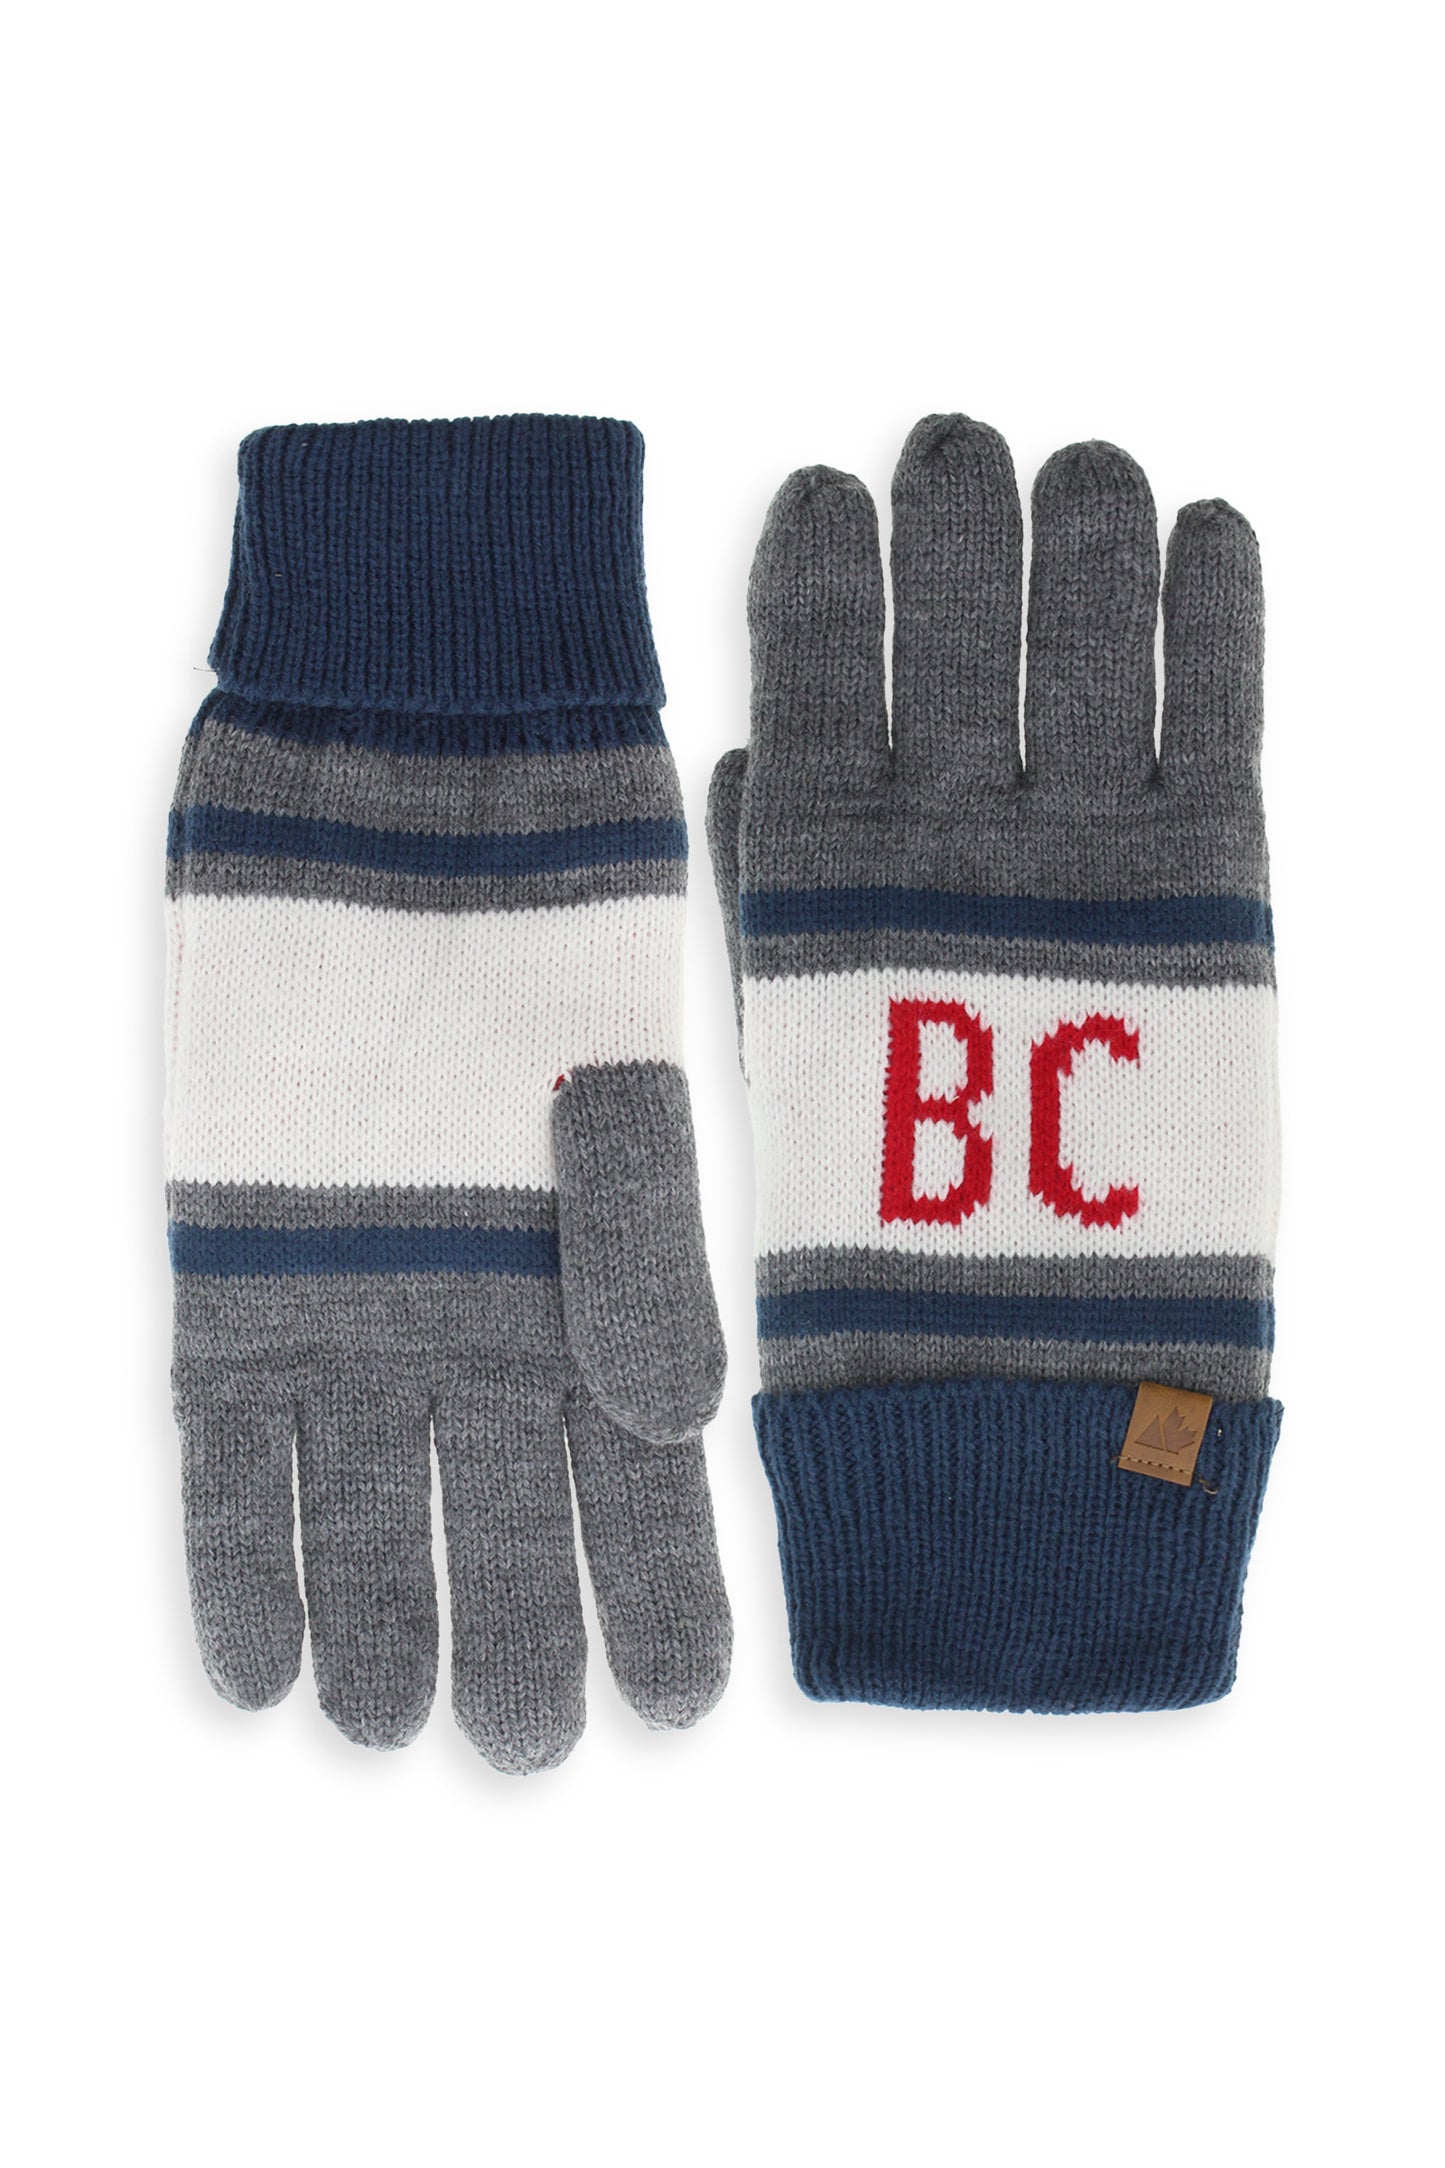 Provinces of Canada Gloves